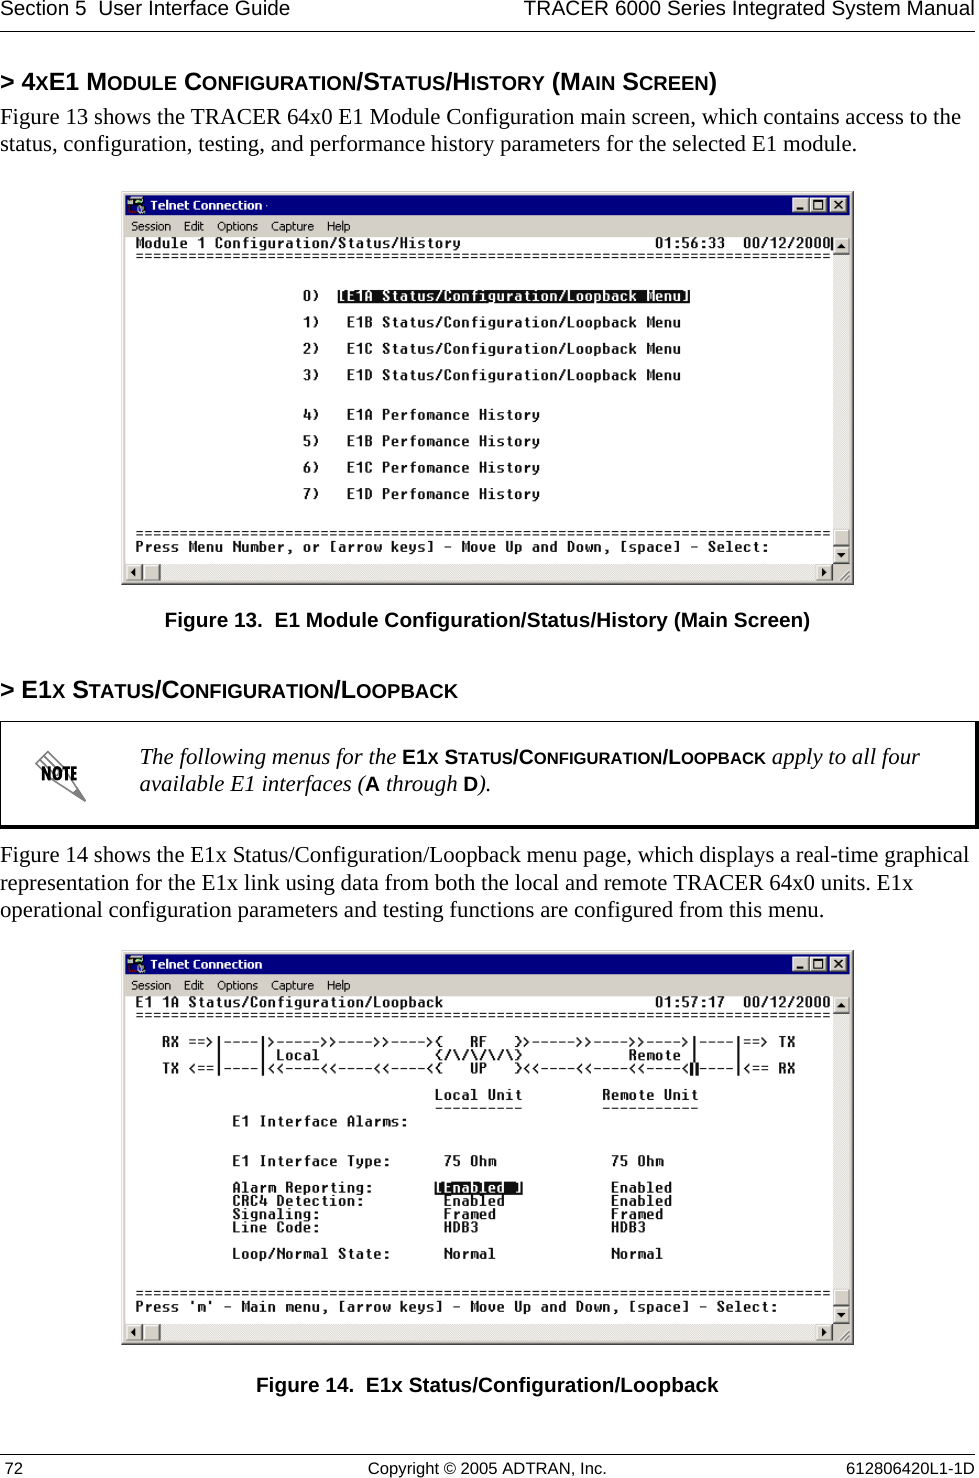 Section 5  User Interface Guide TRACER 6000 Series Integrated System Manual 72 Copyright © 2005 ADTRAN, Inc. 612806420L1-1D&gt; 4XE1 MODULE CONFIGURATION/STATUS/HISTORY (MAIN SCREEN)Figure 13 shows the TRACER 64x0 E1 Module Configuration main screen, which contains access to the status, configuration, testing, and performance history parameters for the selected E1 module.Figure 13.  E1 Module Configuration/Status/History (Main Screen)&gt; E1X STATUS/CONFIGURATION/LOOPBACKFigure 14 shows the E1x Status/Configuration/Loopback menu page, which displays a real-time graphical representation for the E1x link using data from both the local and remote TRACER 64x0 units. E1x operational configuration parameters and testing functions are configured from this menu.Figure 14.  E1x Status/Configuration/LoopbackThe following menus for the E1X STATUS/CONFIGURATION/LOOPBACK apply to all four available E1 interfaces (A through D).